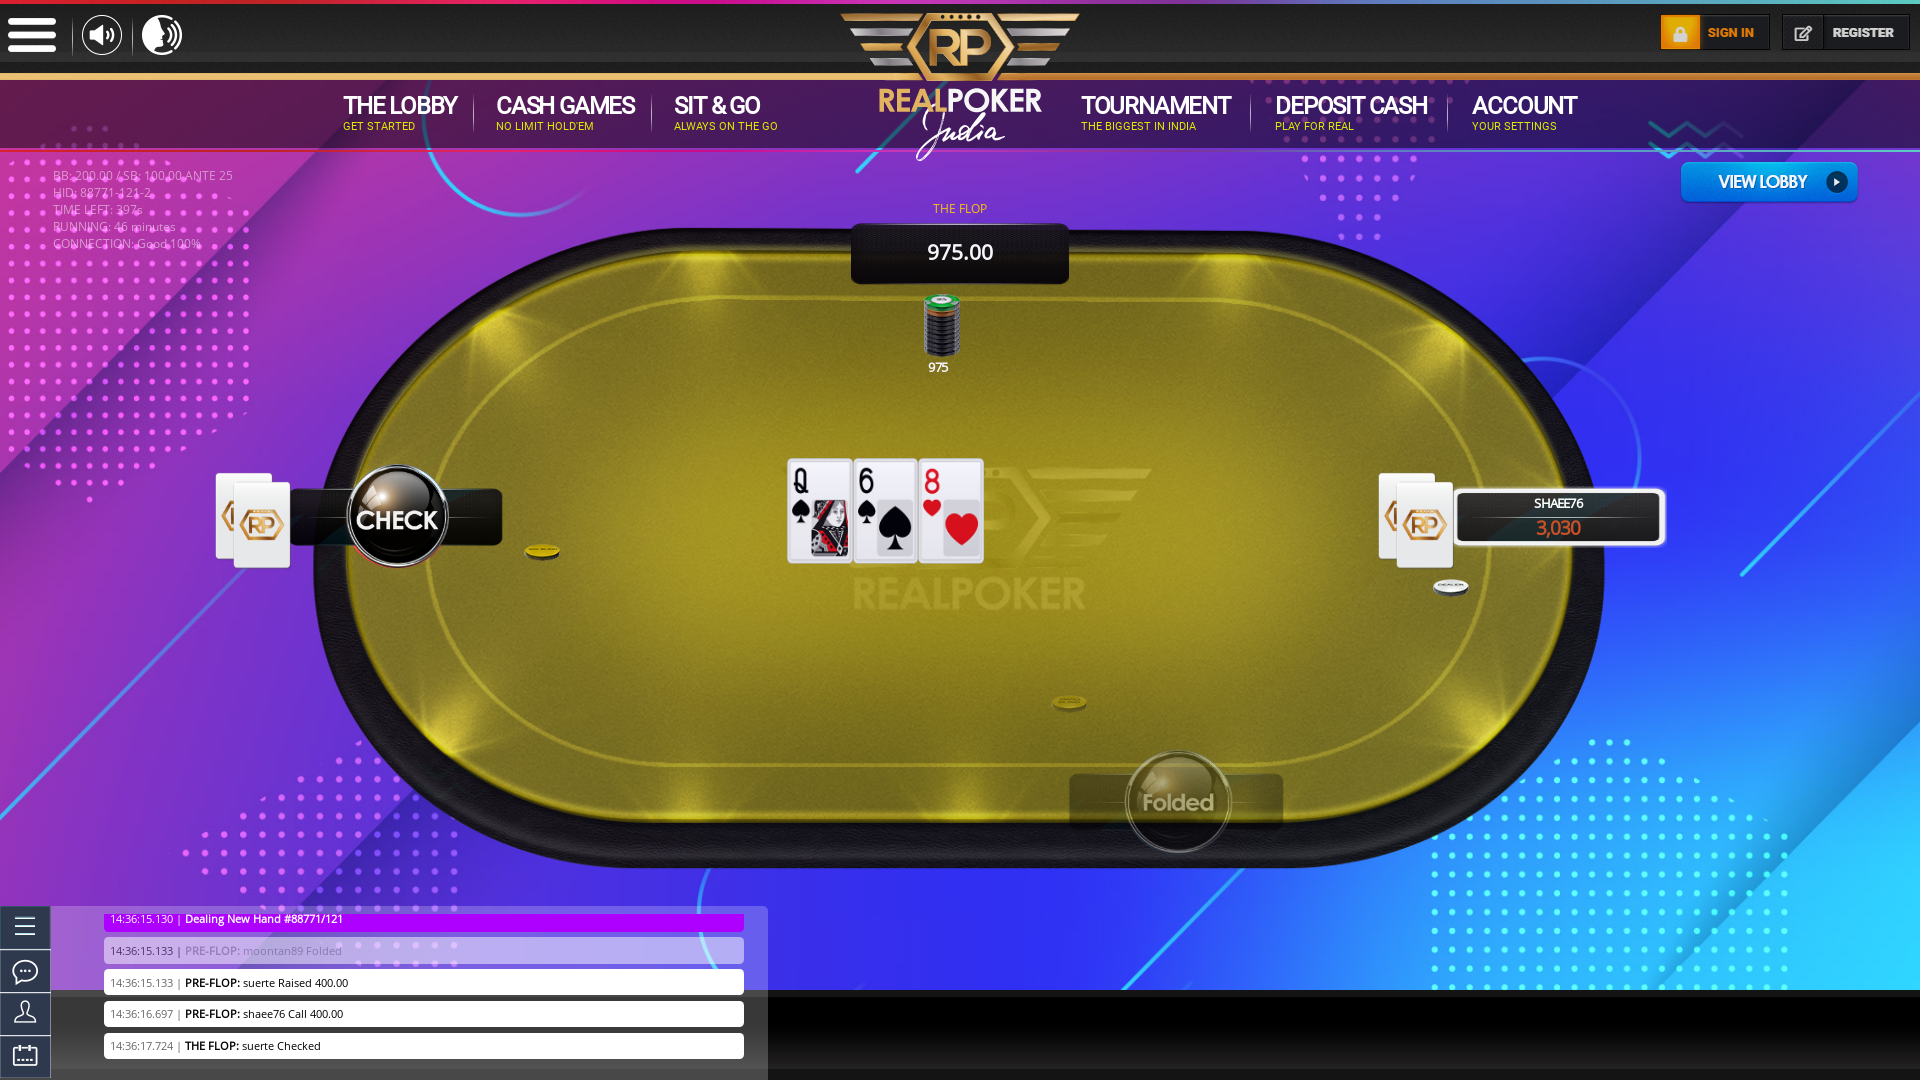 Indian online poker on a 6 player table in the 46th minute match up